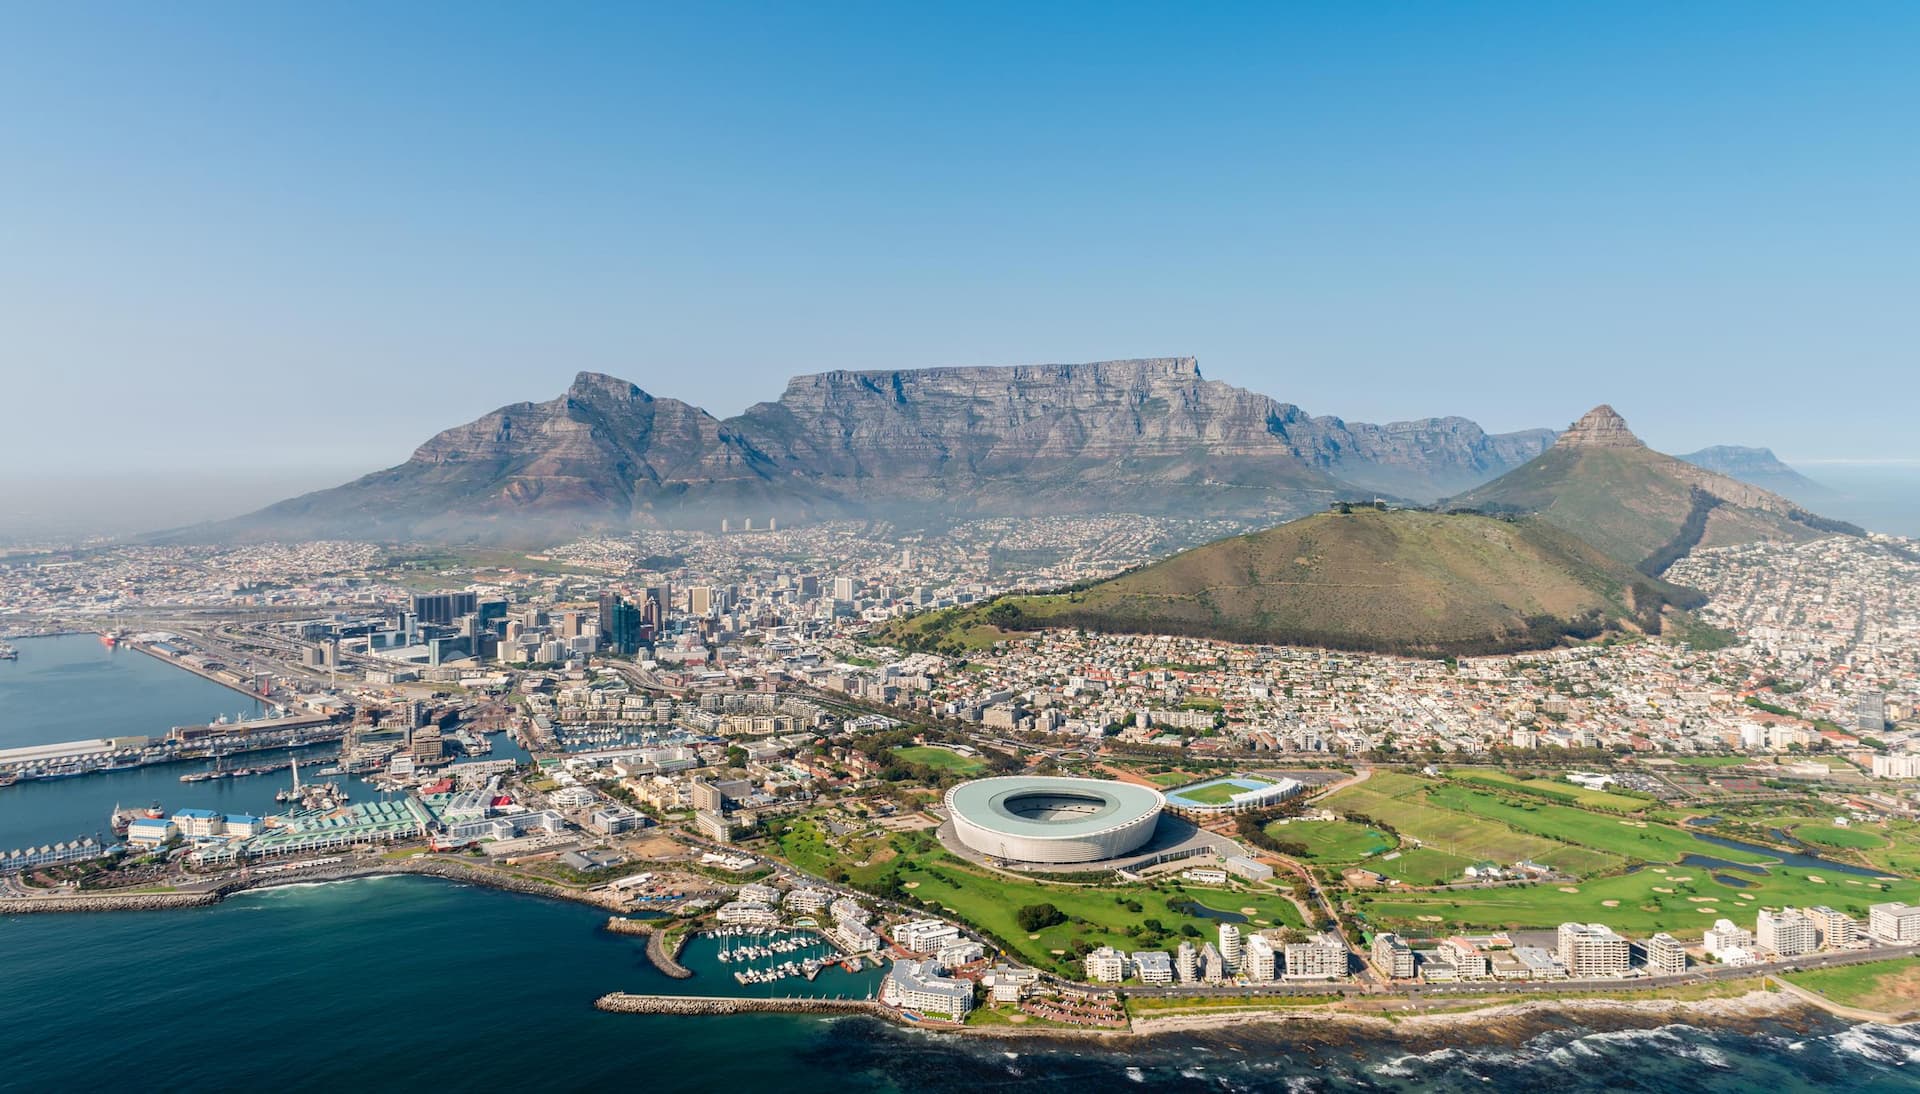 Cape Town, South Africa (aerial view from a helicopter)